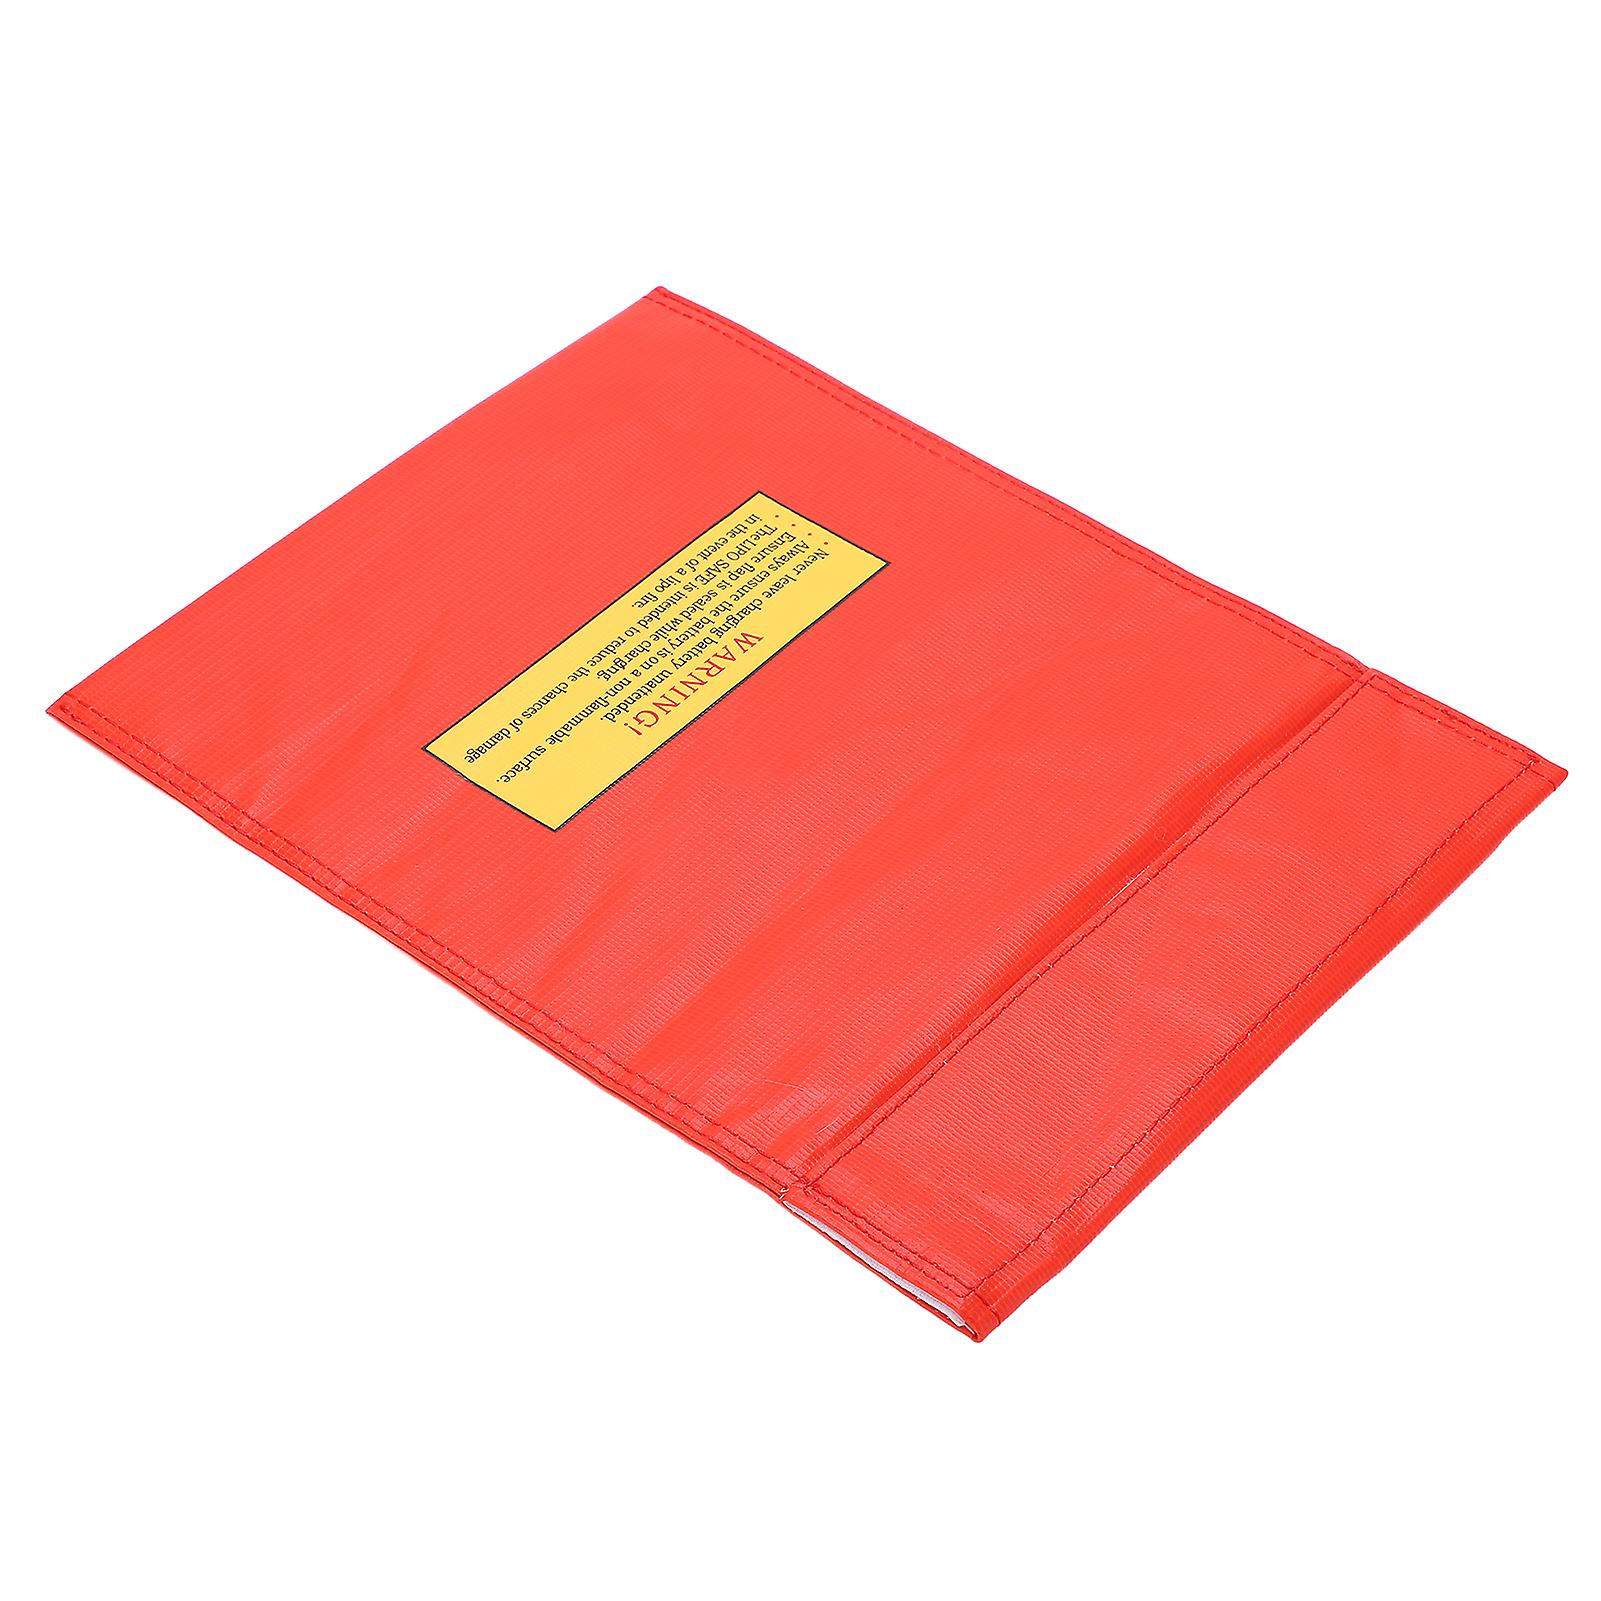 Lipo Battery Explosion Proof Bag Fireproof Lithium Battery Safe Guard Bag For Safe Charging And Storagered